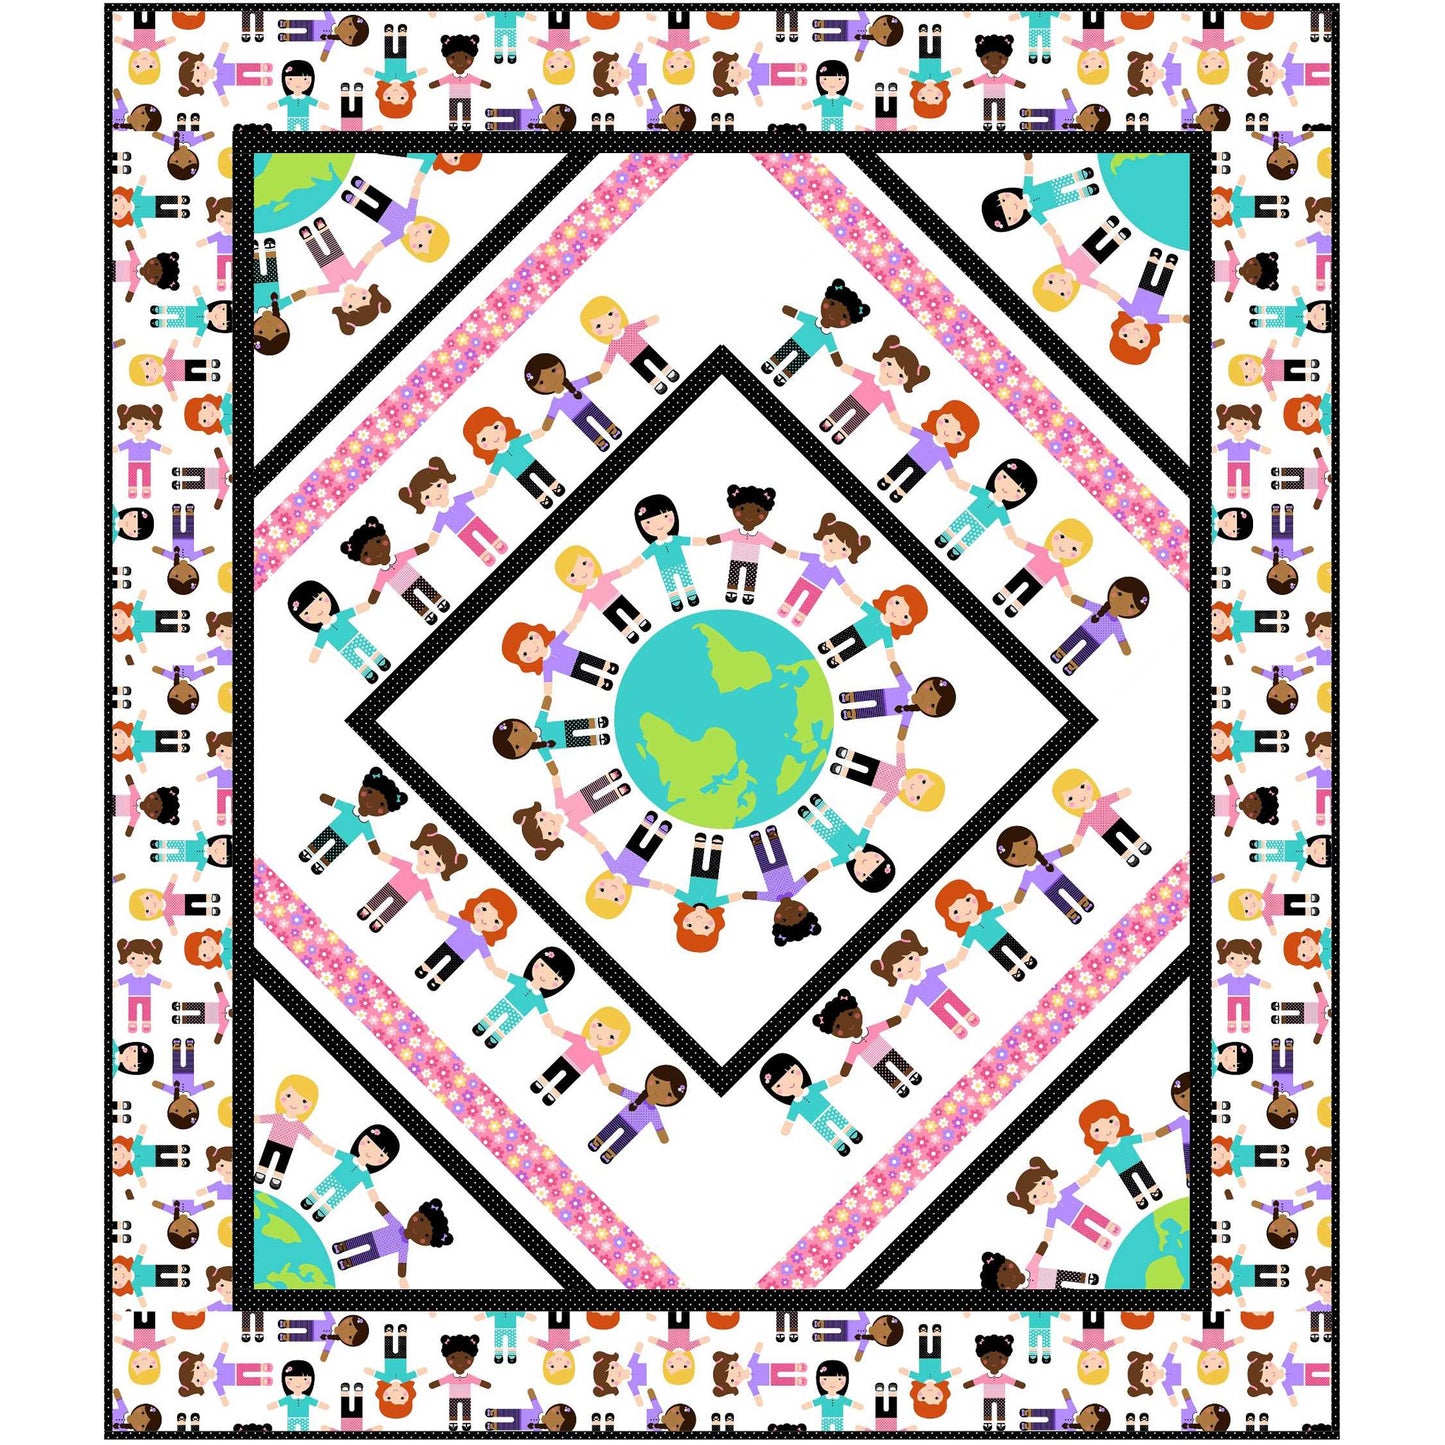 Children around the world colorful quilt with children and the earth design, perfect for a child's bedroom decor.